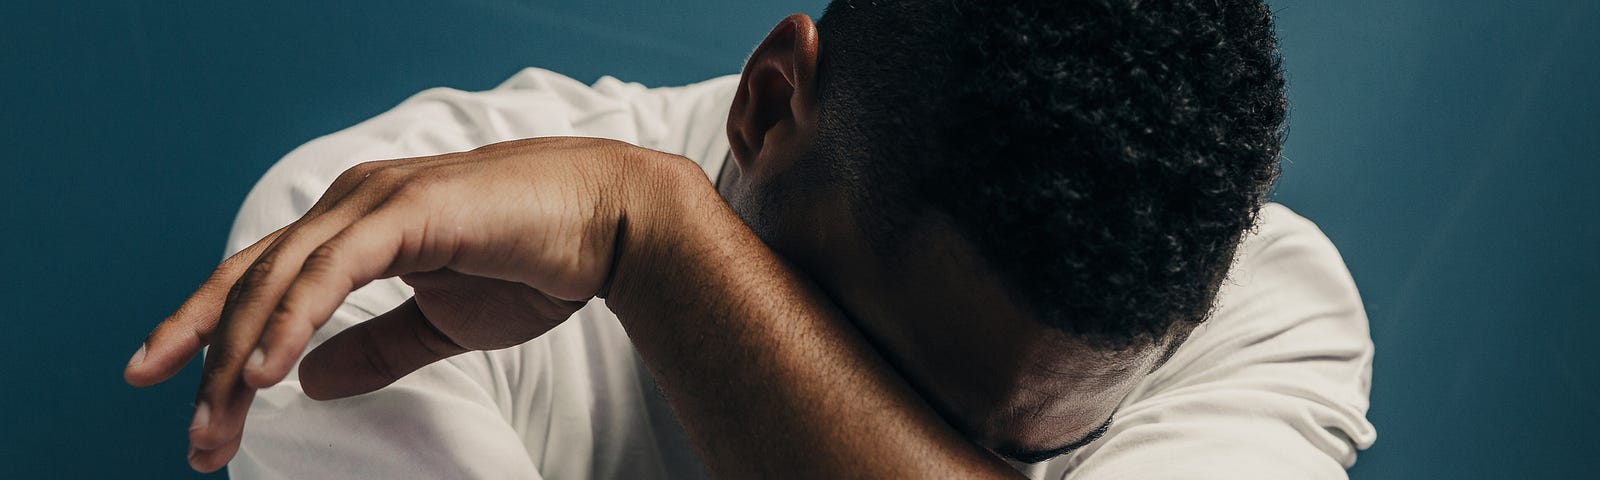 A Black man hides his face in his arm and apprears to be crying.